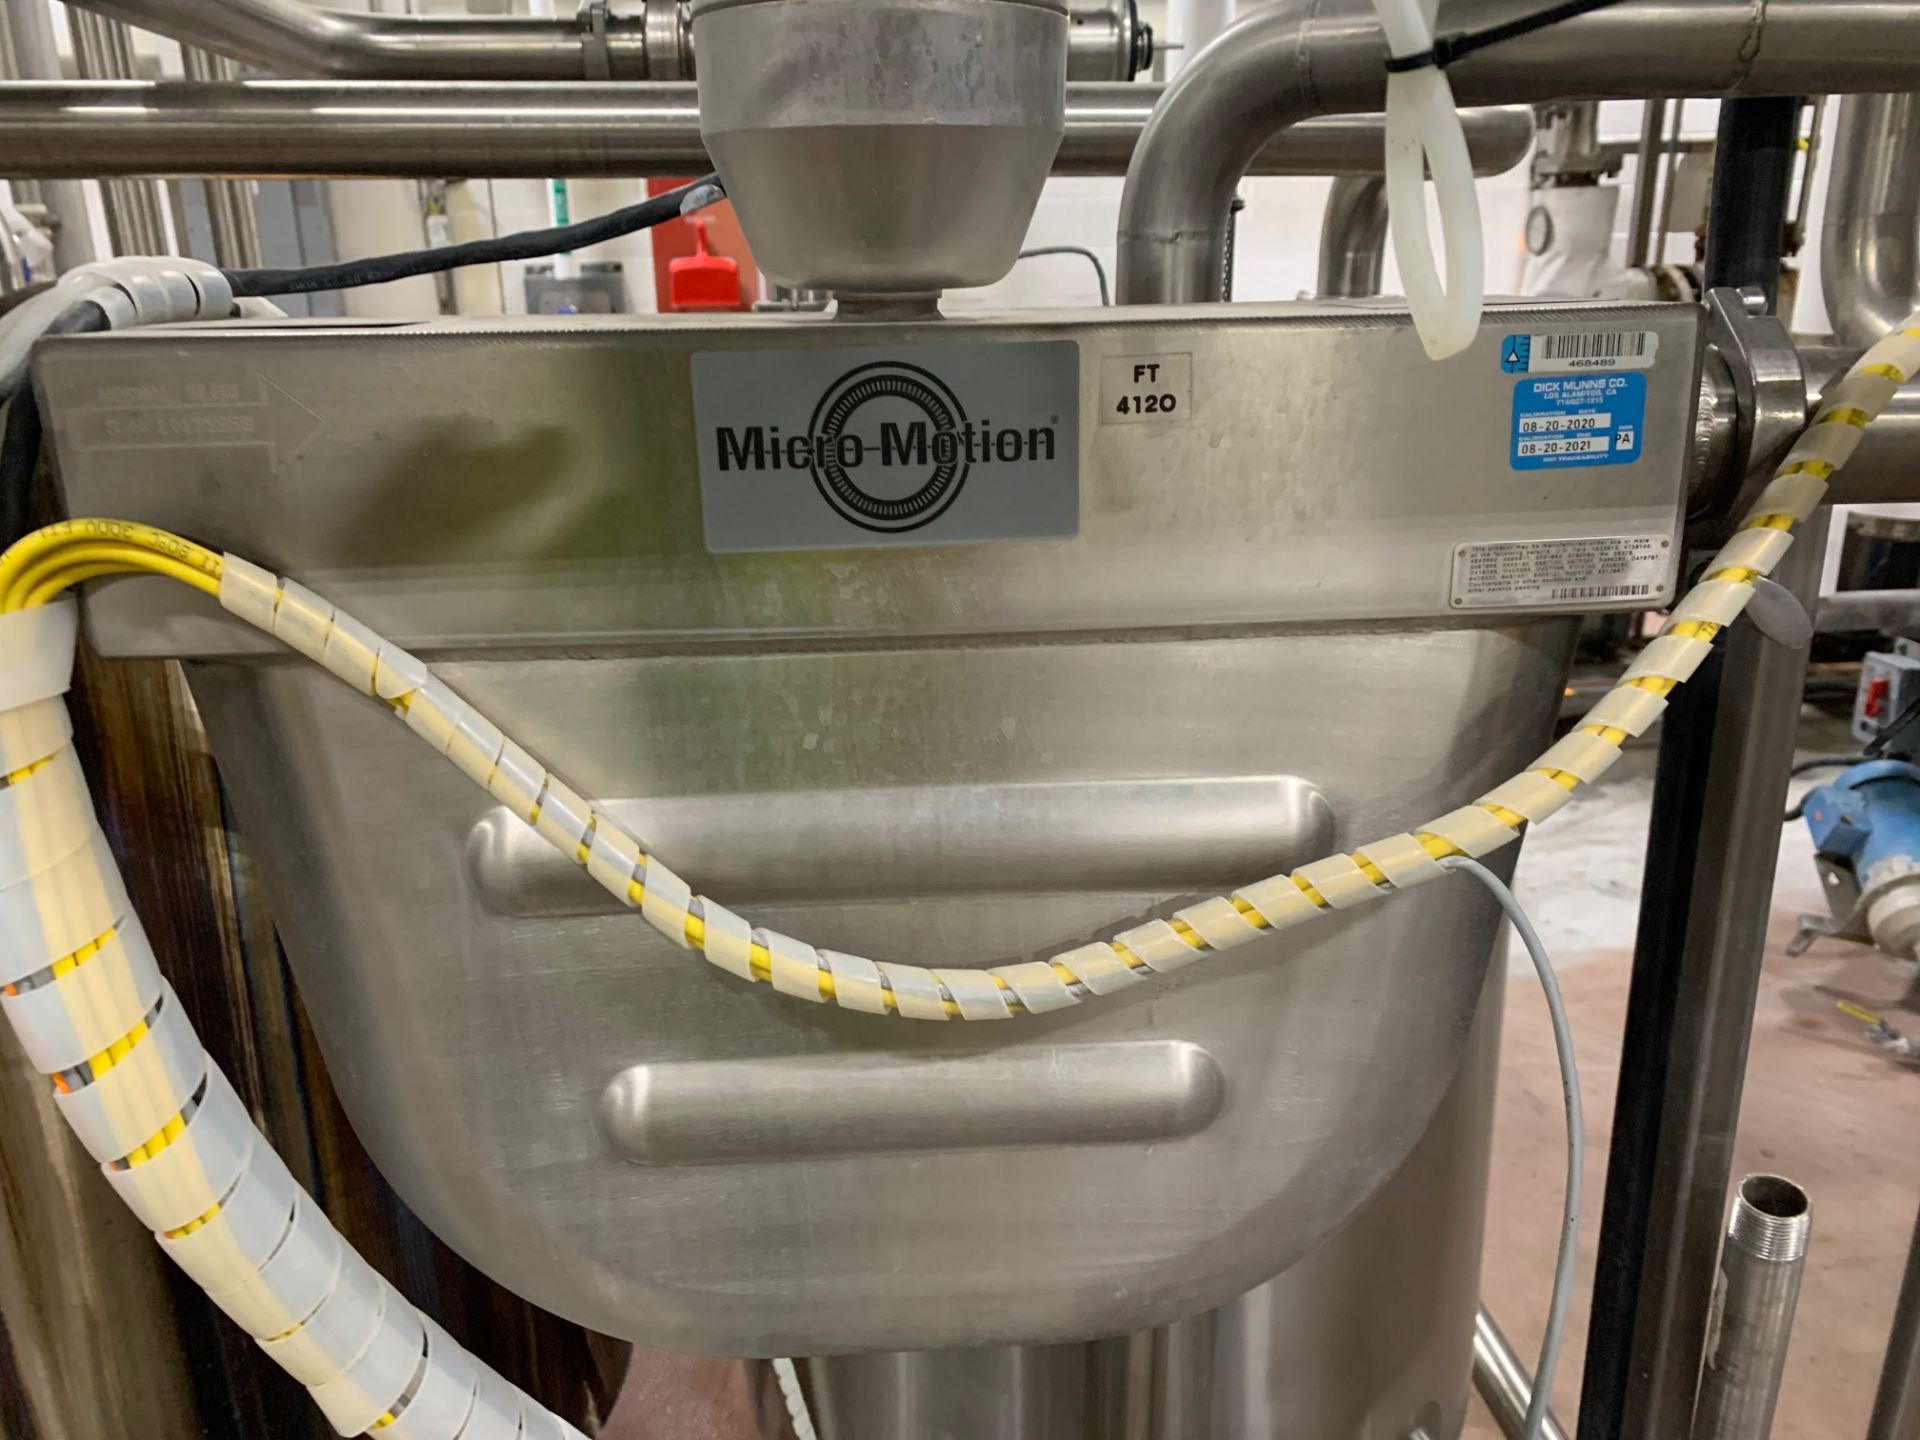 AGC Plate and Frame Pasteurization System - Image 19 of 28